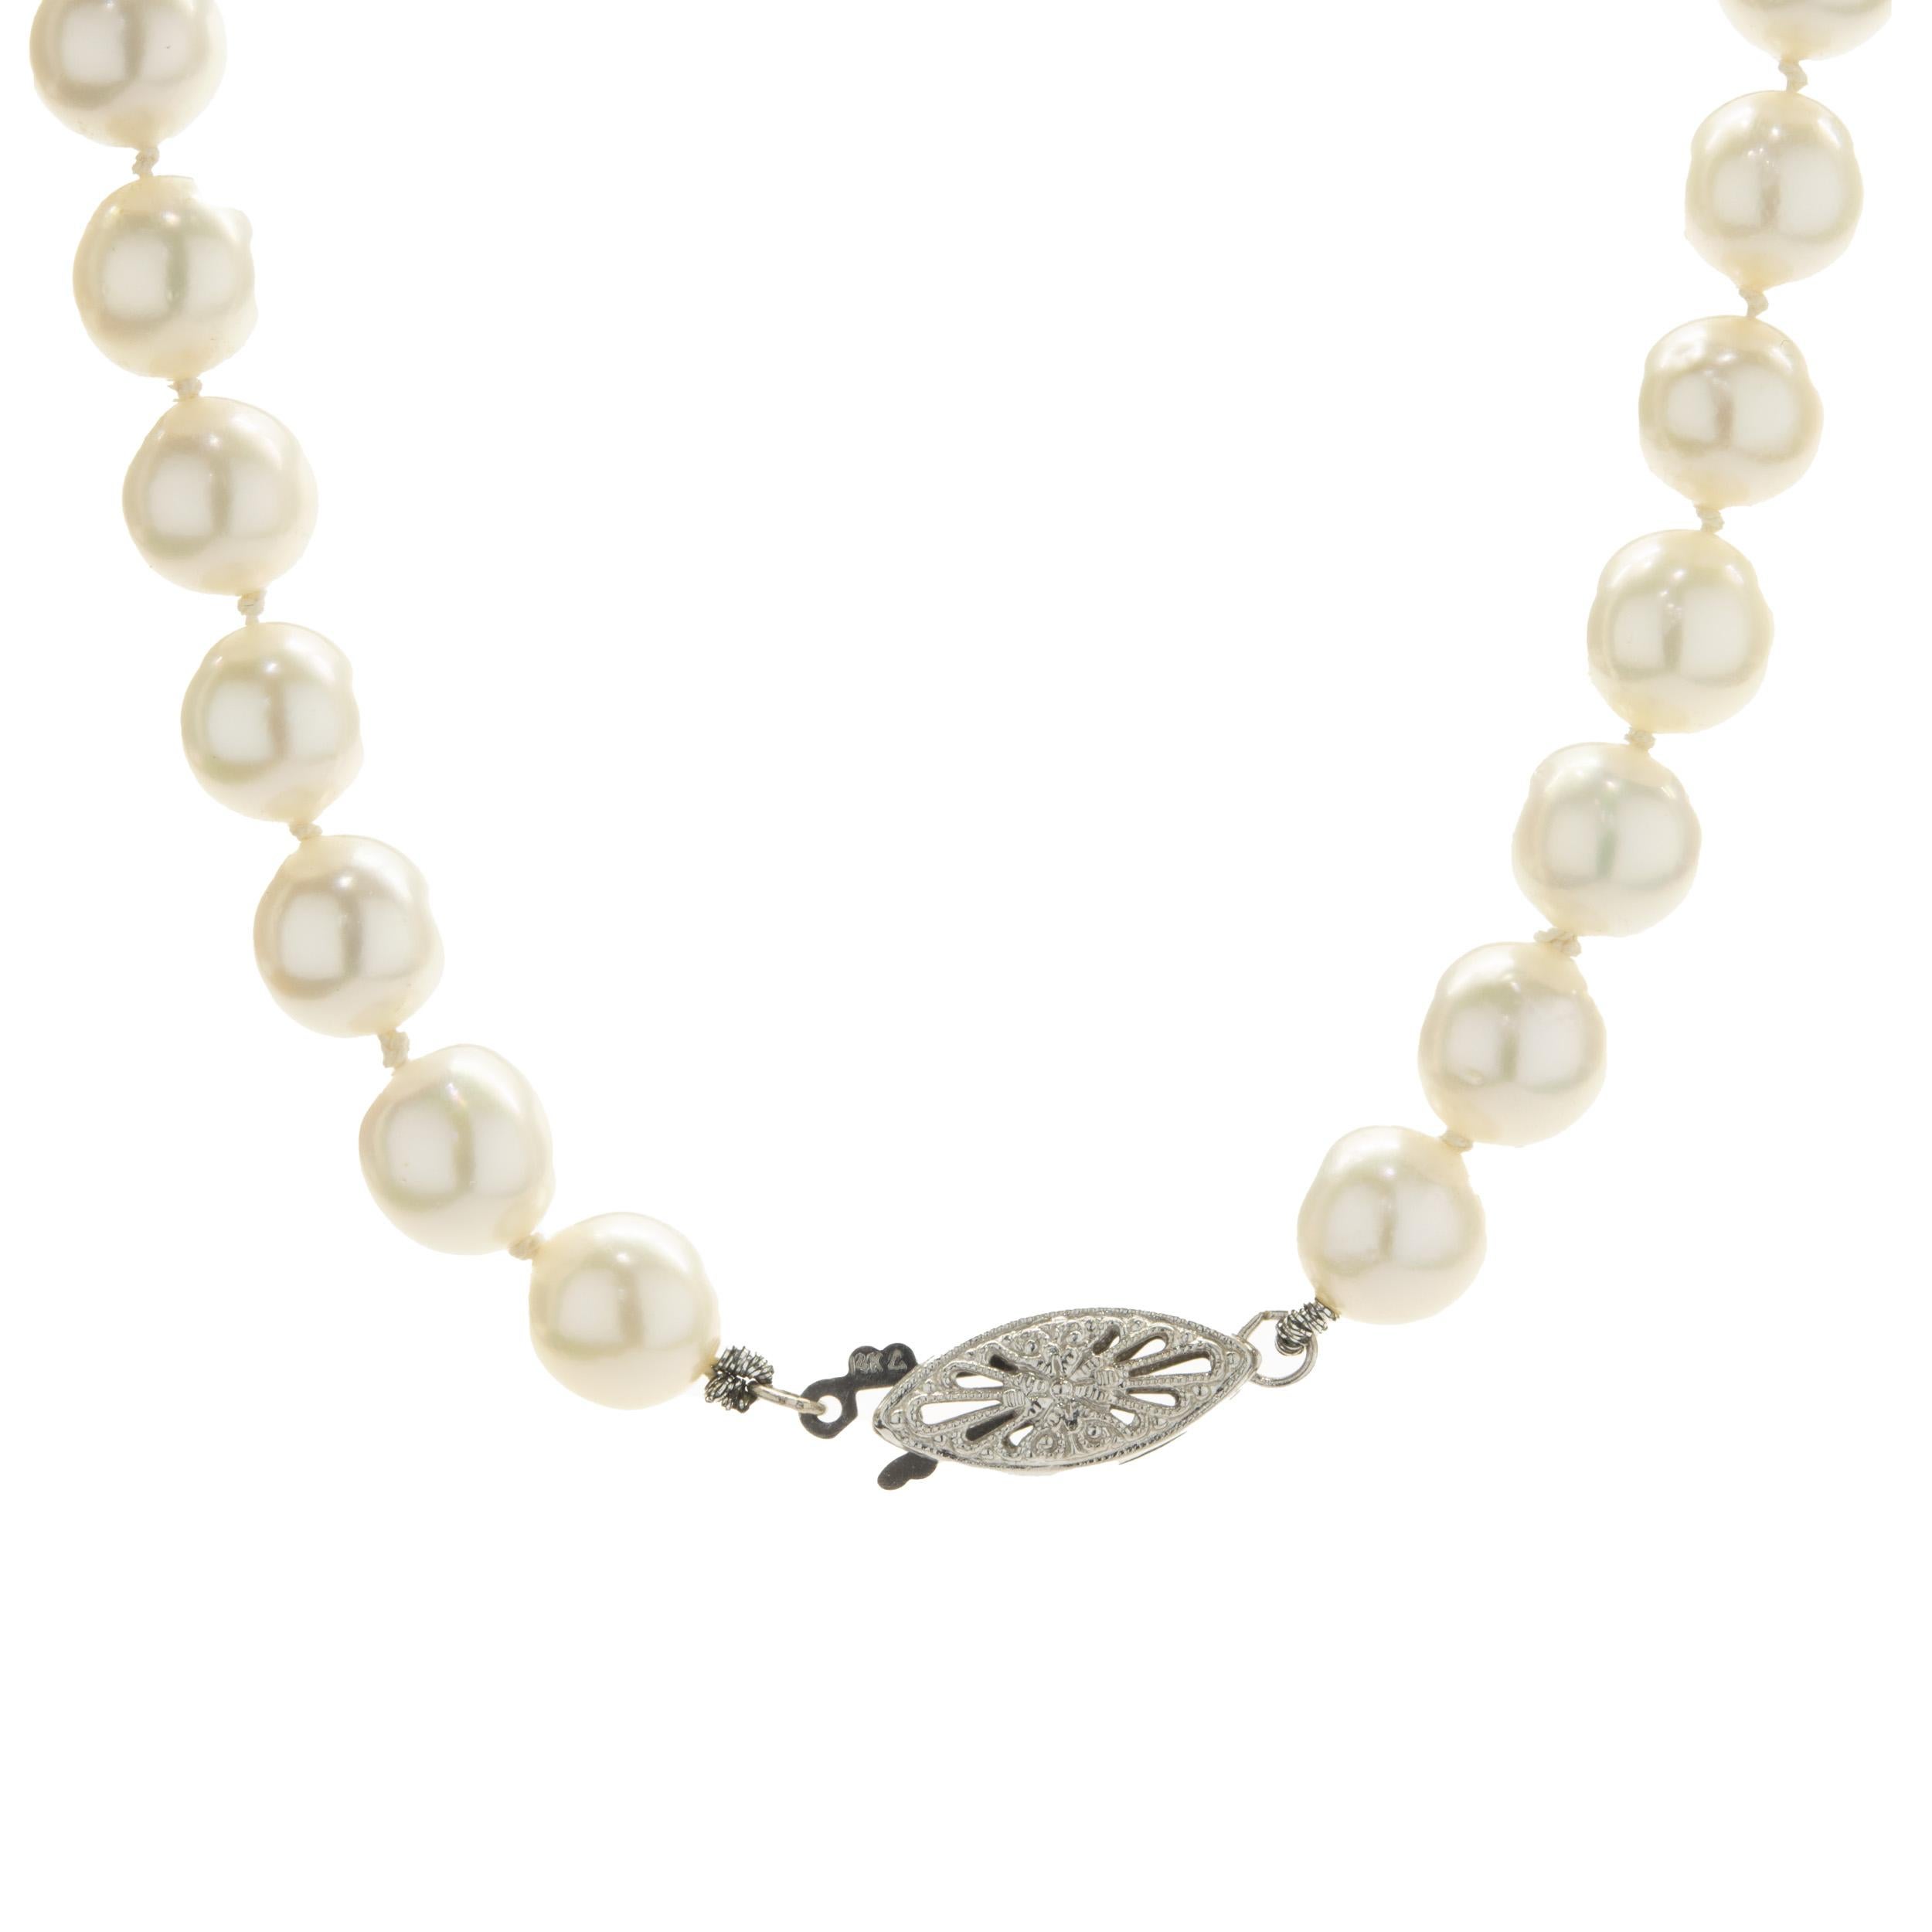 Designer: custom
Material: 8MM Akoya Pearl
Weight: 31.56 grams
Dimensions: necklace measures 18-inches